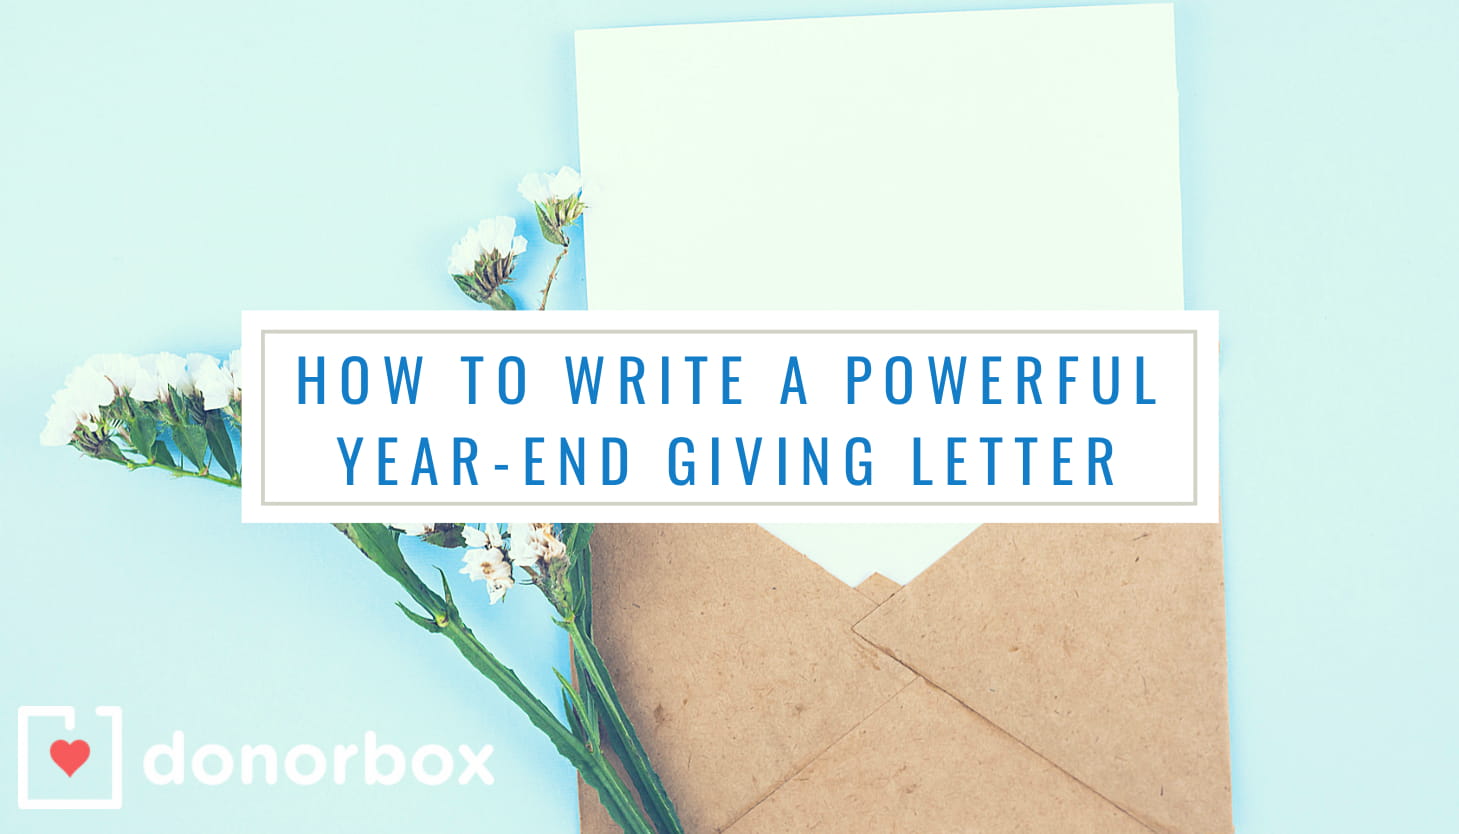 How to Write a Powerful Year-End Giving Letter – 7 Tips (with Samples)